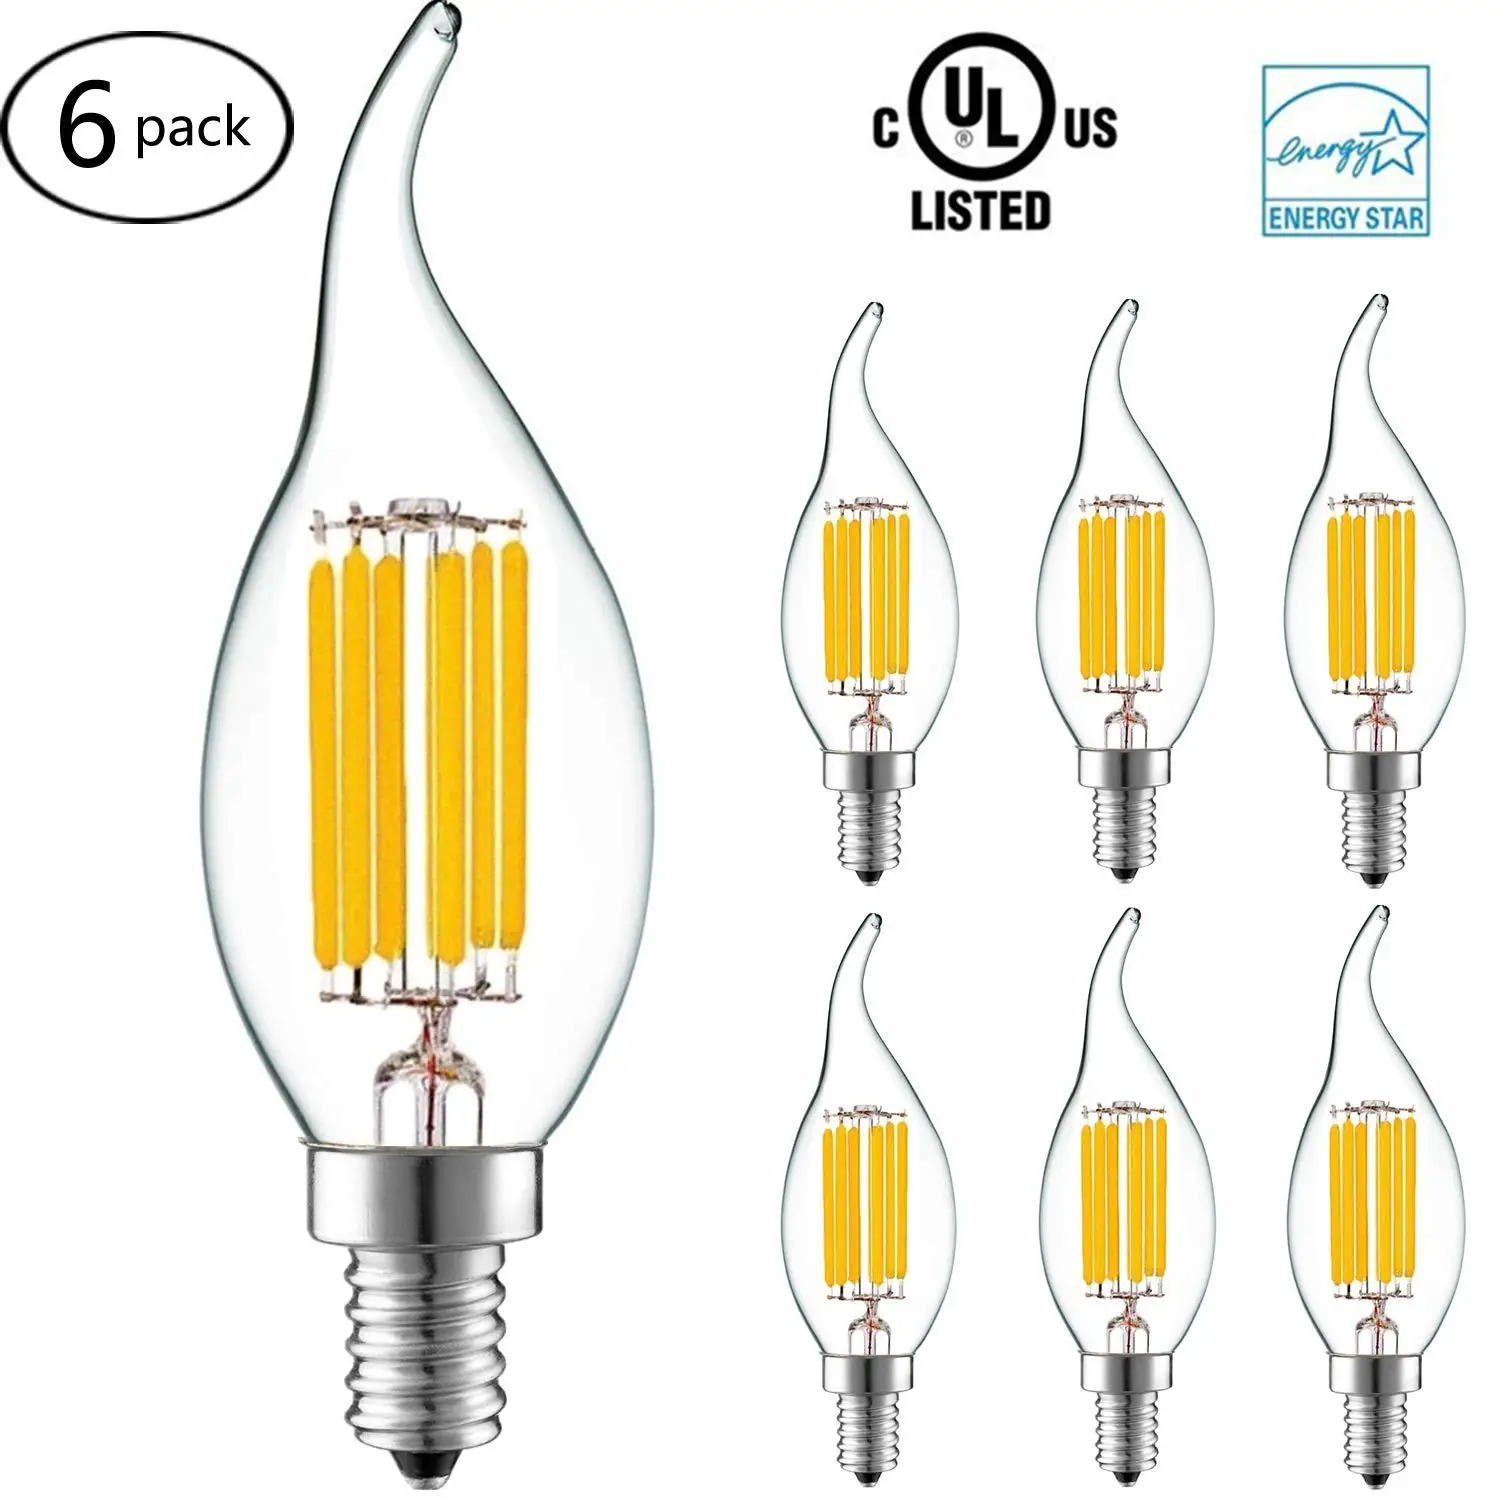 Acidea 6W Dimmable LED Filament Candle Light Bulb E12 Clear Candlestick Base Lamp C35 Flame Shape Bent Tip 60W Incandescent Equivalent 5 Pack 2700K Warm White 600LM